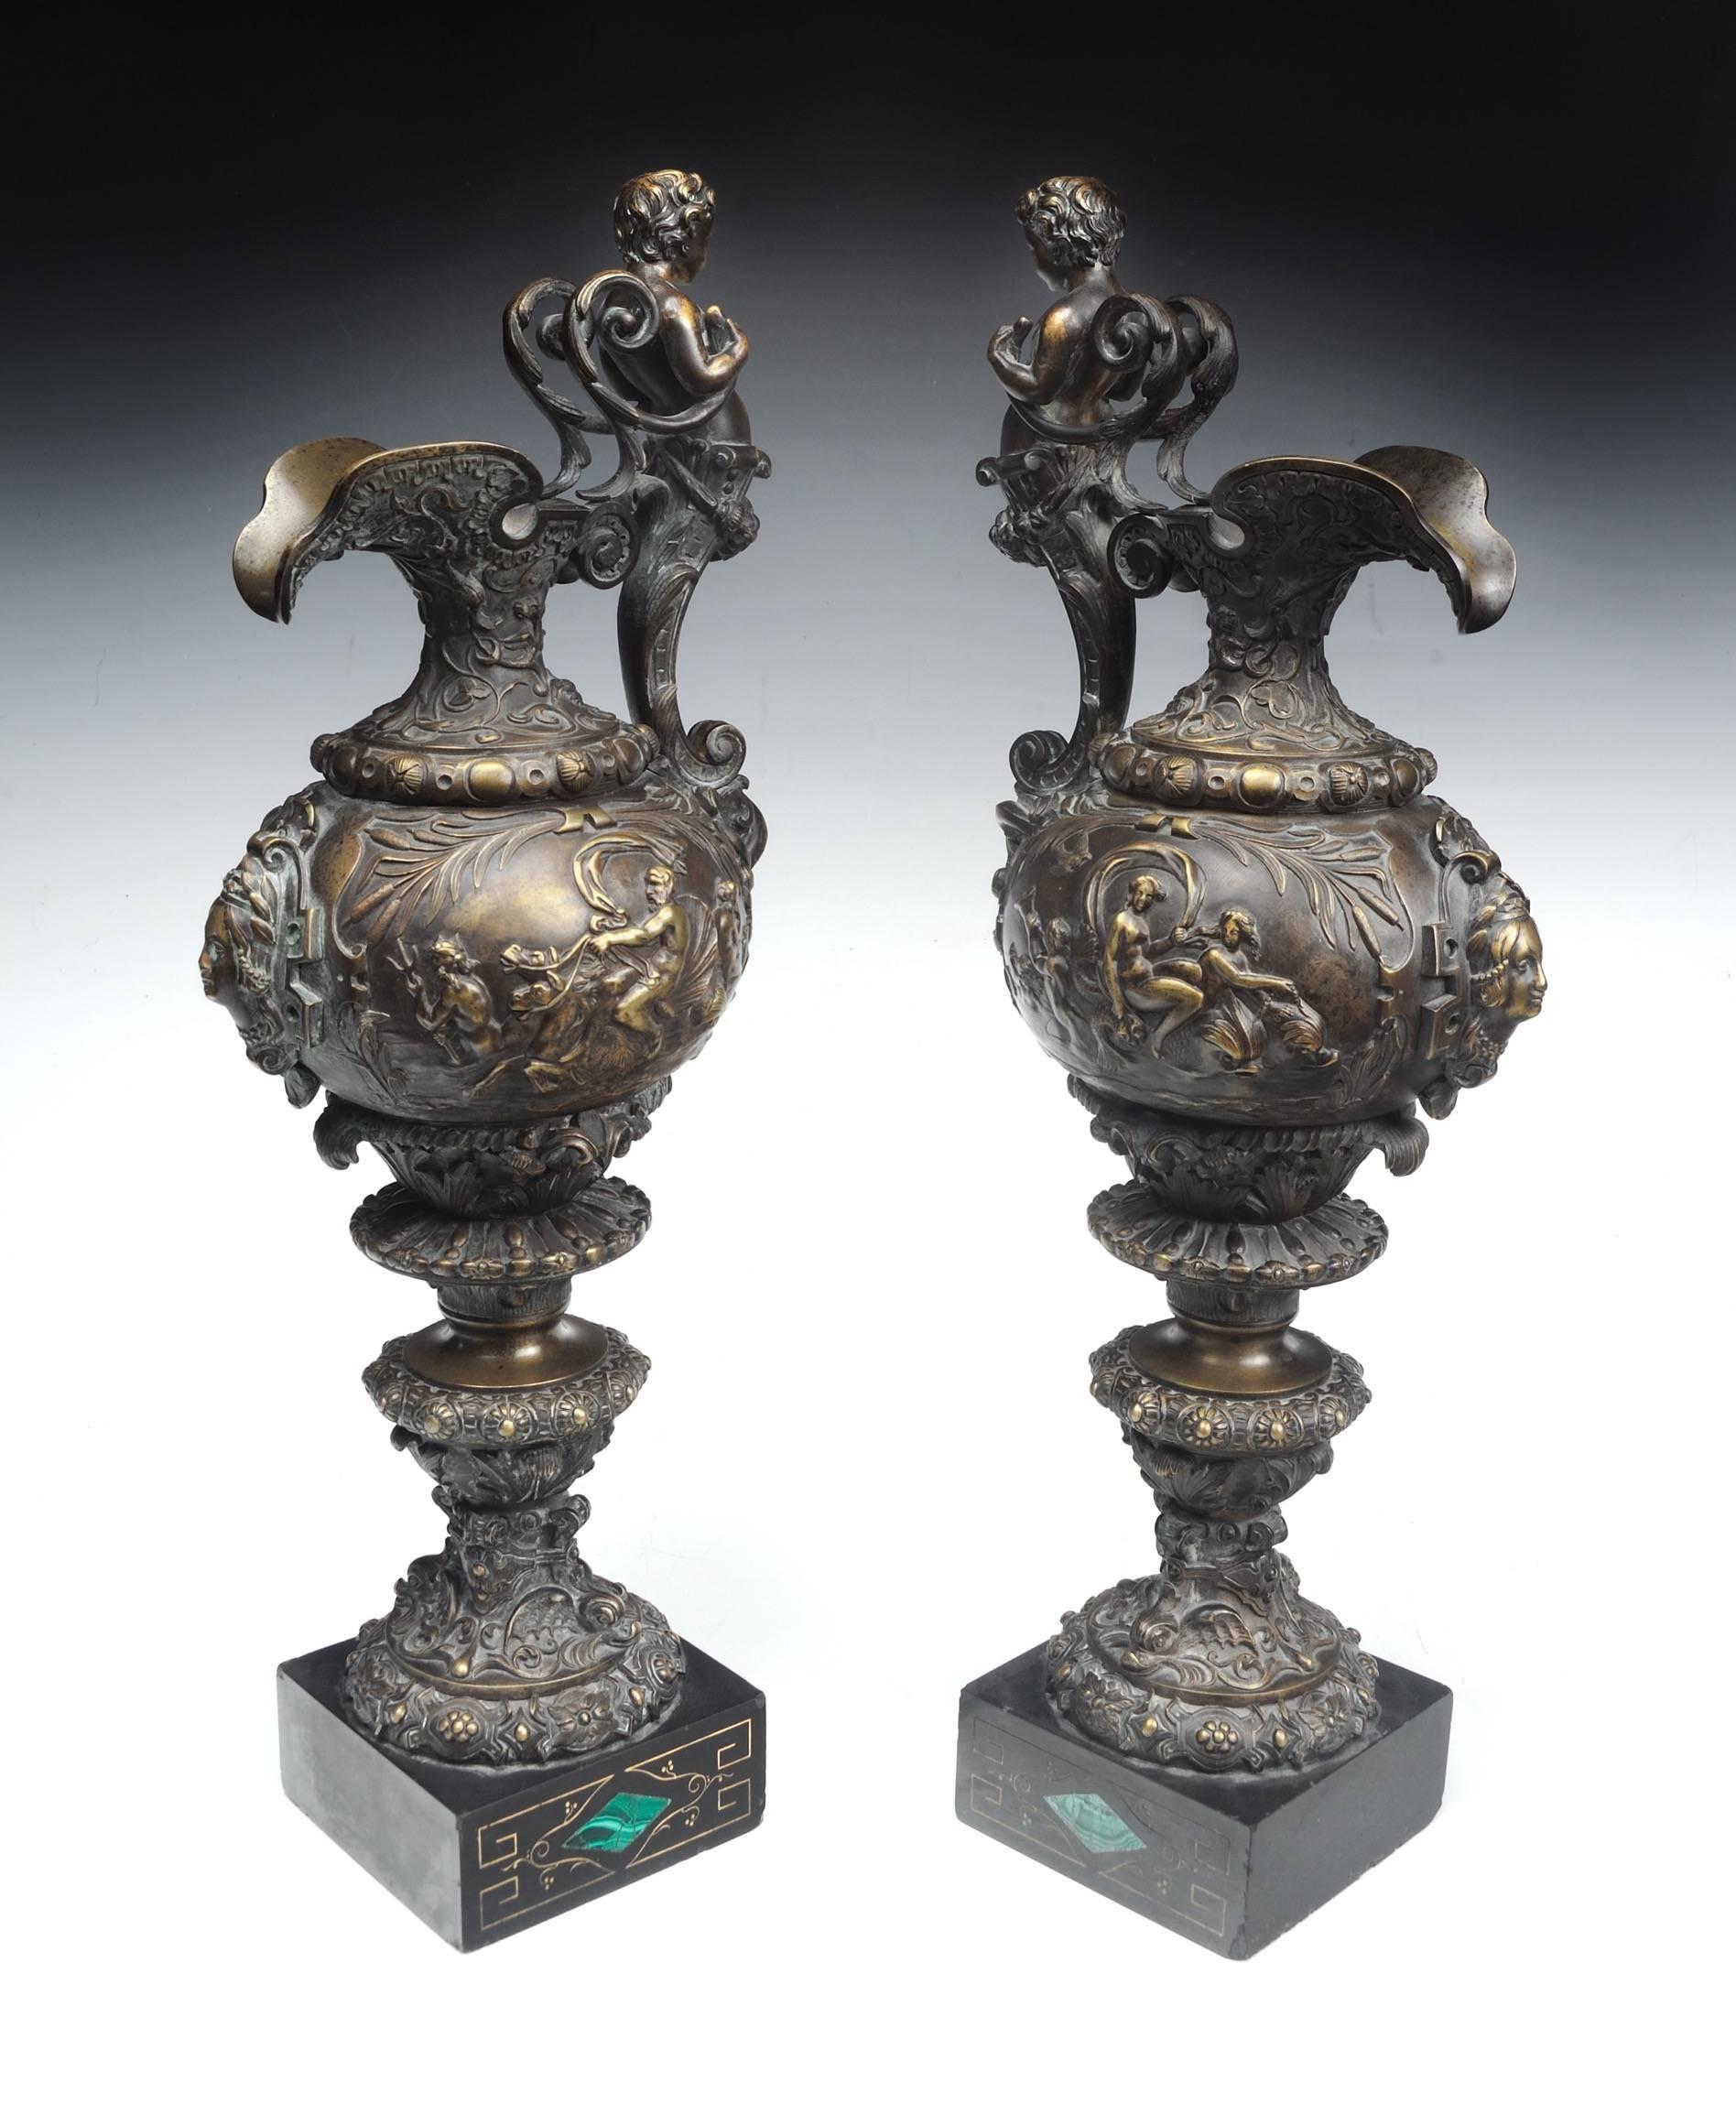 "Large 19th Century French Patined Bronze Ewers"  
France ca. 1880
Cast Bronze with Granite Bases
21" x 8" x 6.5" inches